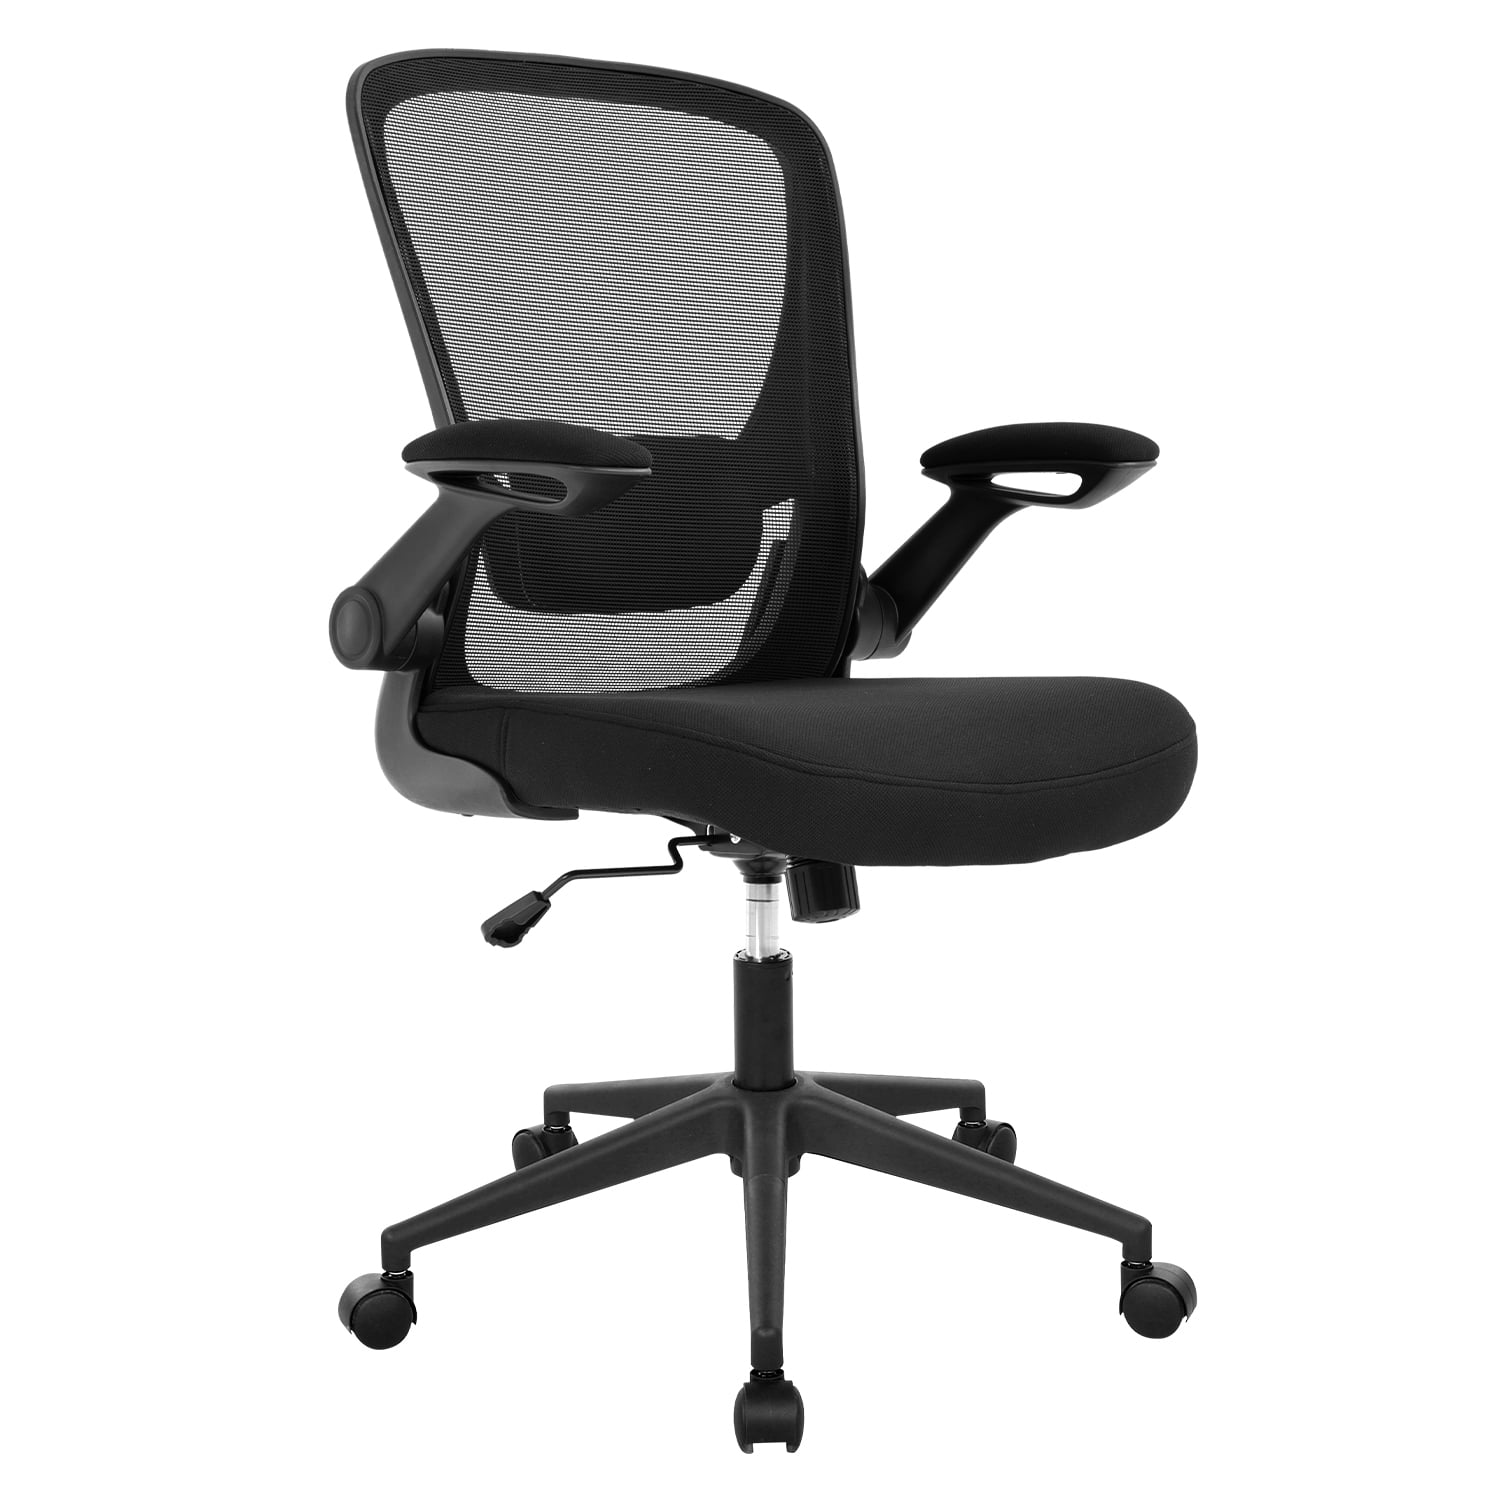 High quality Office Chairs For Ergonomic Support